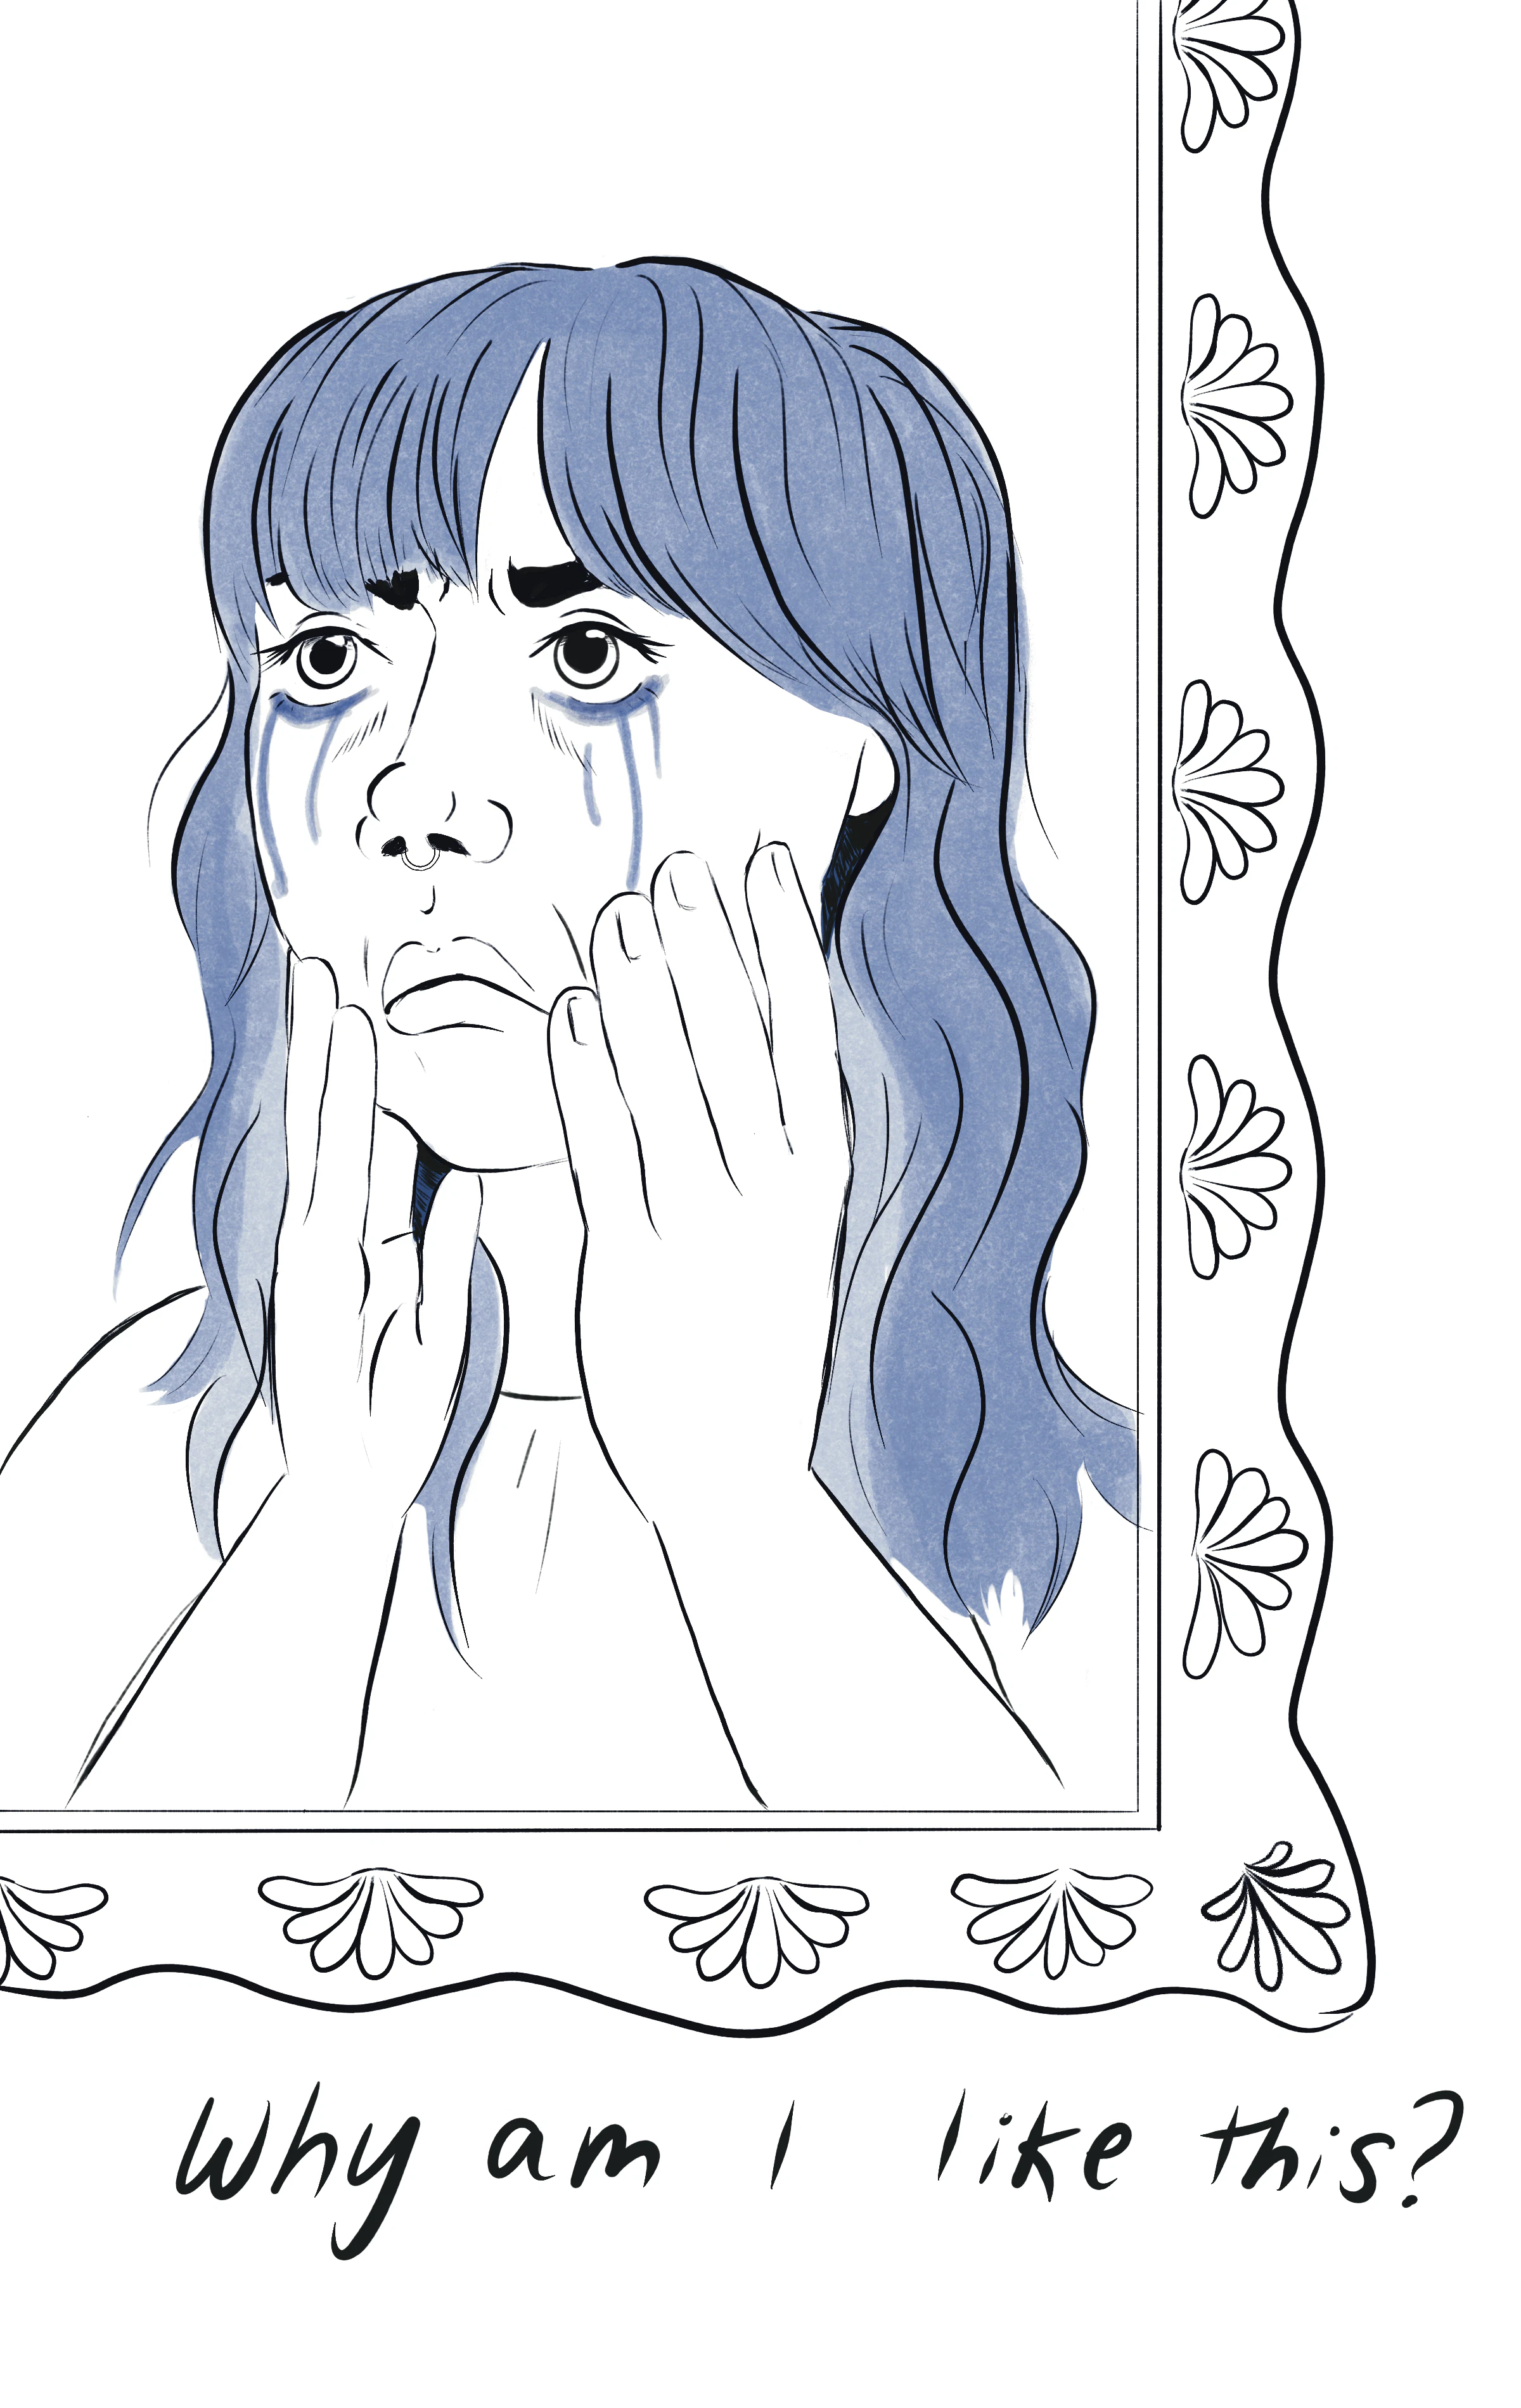 “Why am I like this?”
Rachel looks at themself in the mirror. They have thick eyebrows, bangs, and wavy hair past their shoulders, rendered in soft blues. They are touching their cheeks with their hands as tears and makeup stream down their face. They look pained, brows furrowed, eyes wide, frowning.